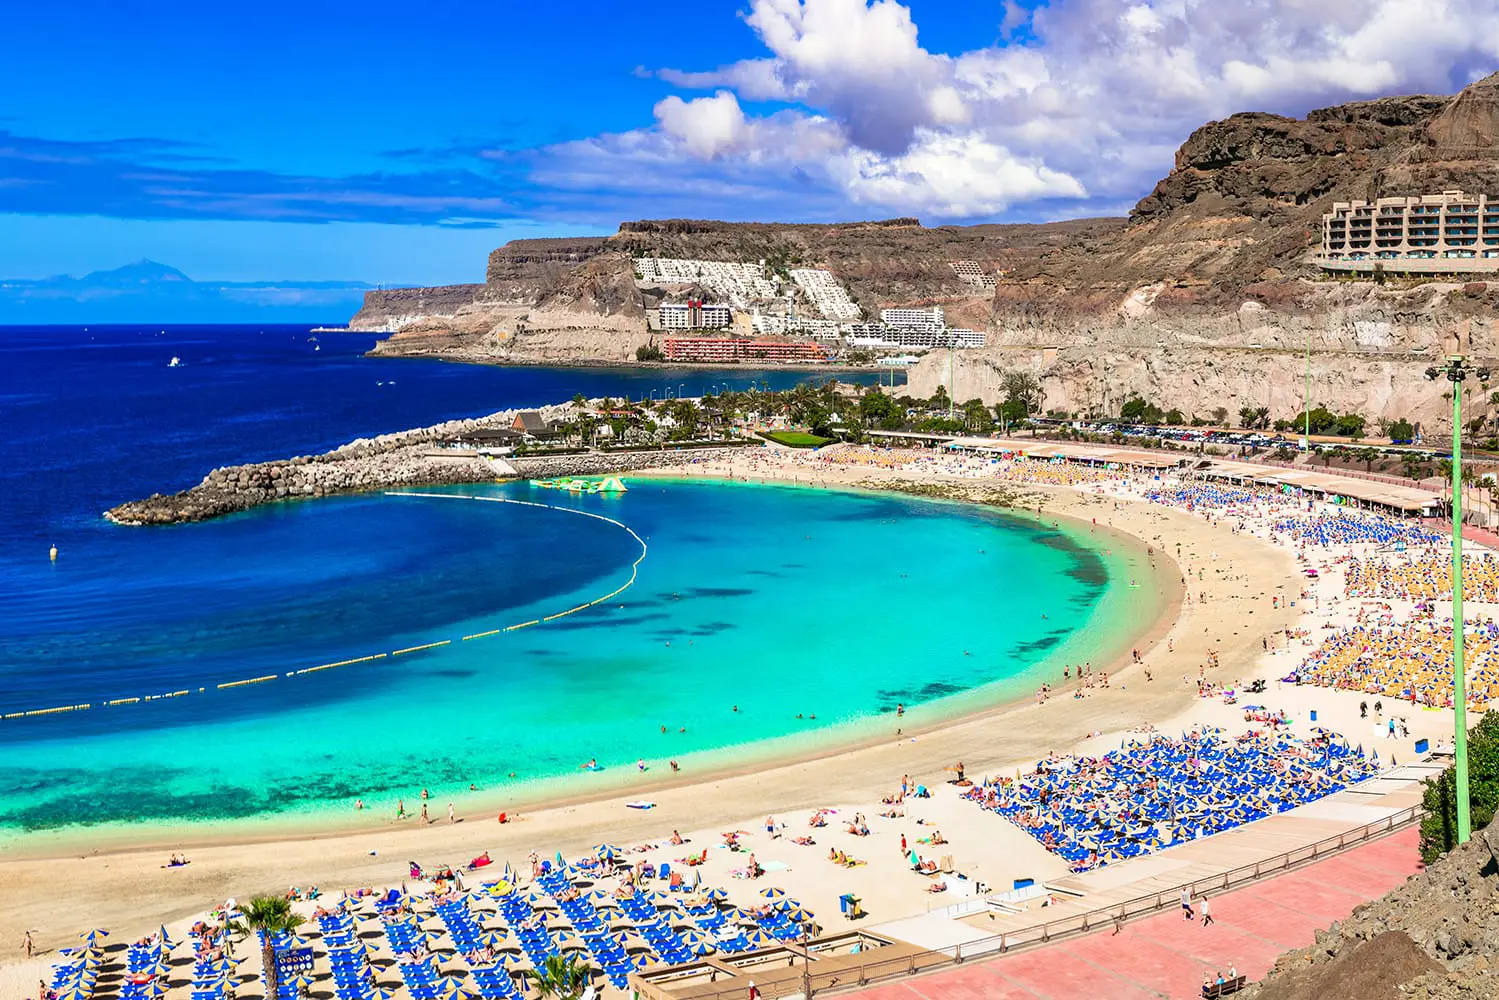 Best beaches of Grand Canary - Playa de los amadores. Canary islands